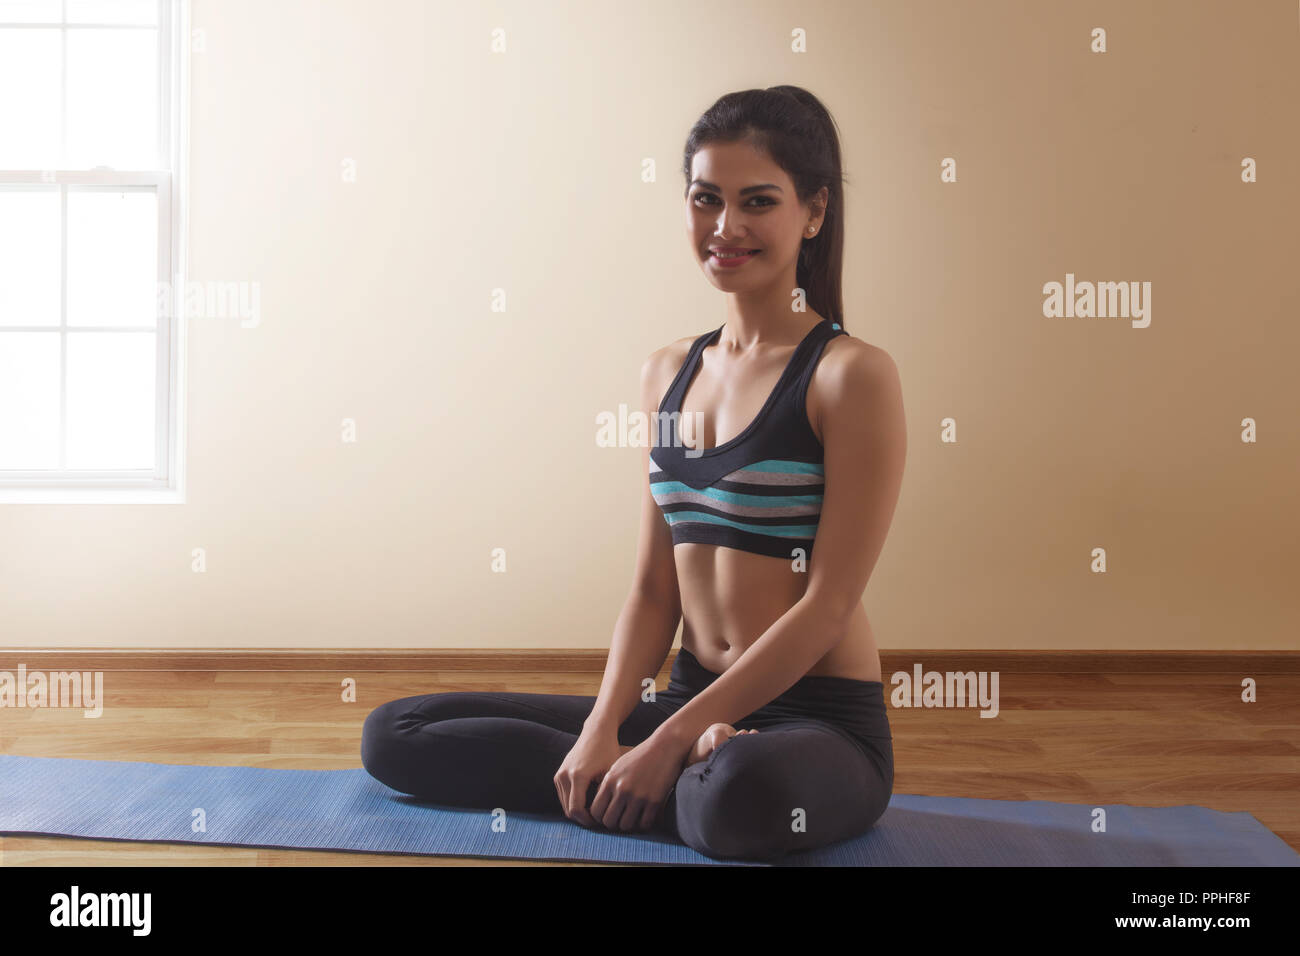 Young woman in workout clothes sitting on yoga mat. Stock Photo